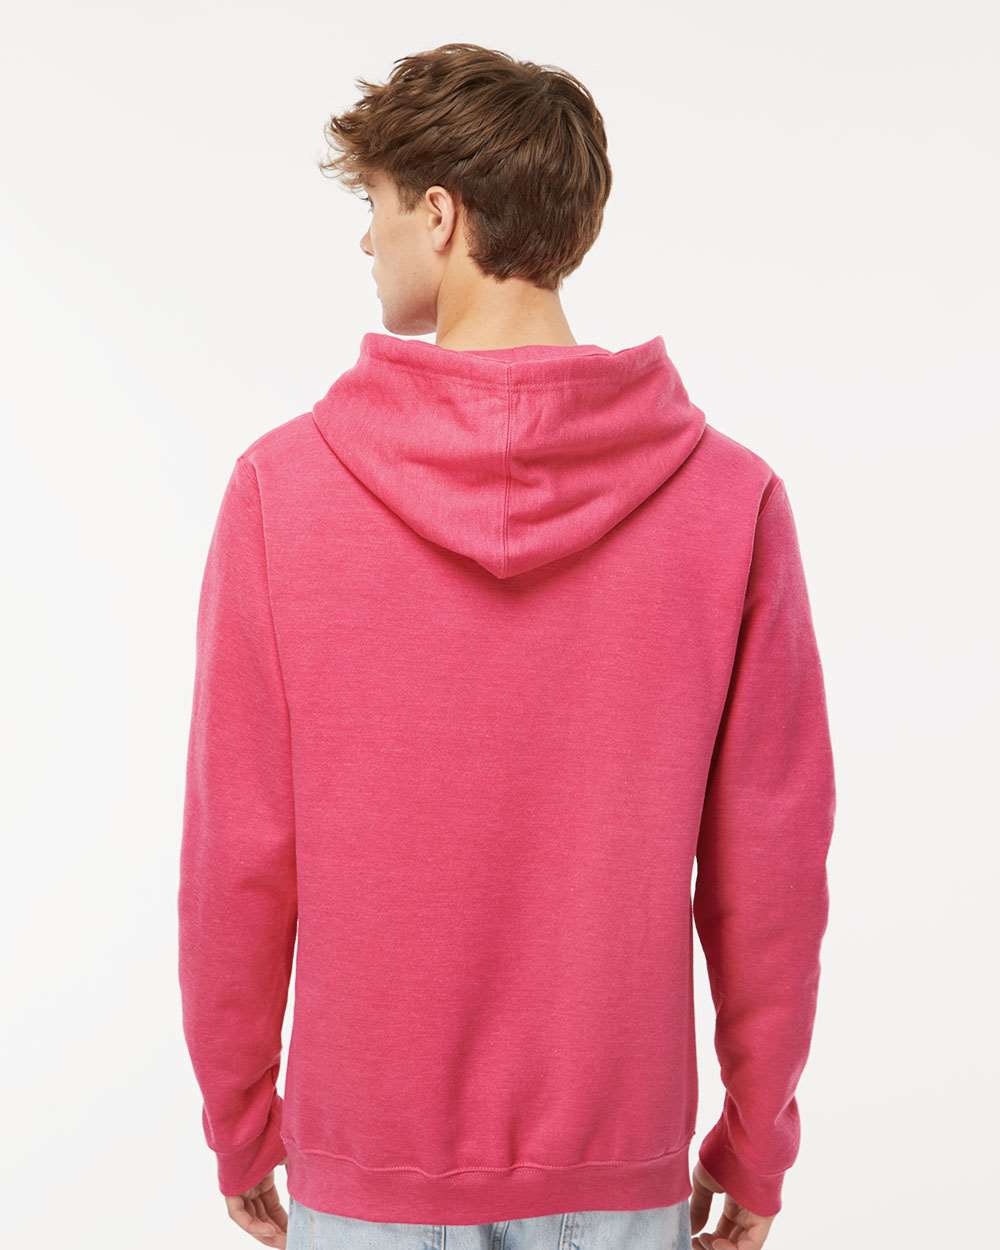 M&O Unisex Pullover Hoodie 3320 #colormdl_Heather Fuchsia